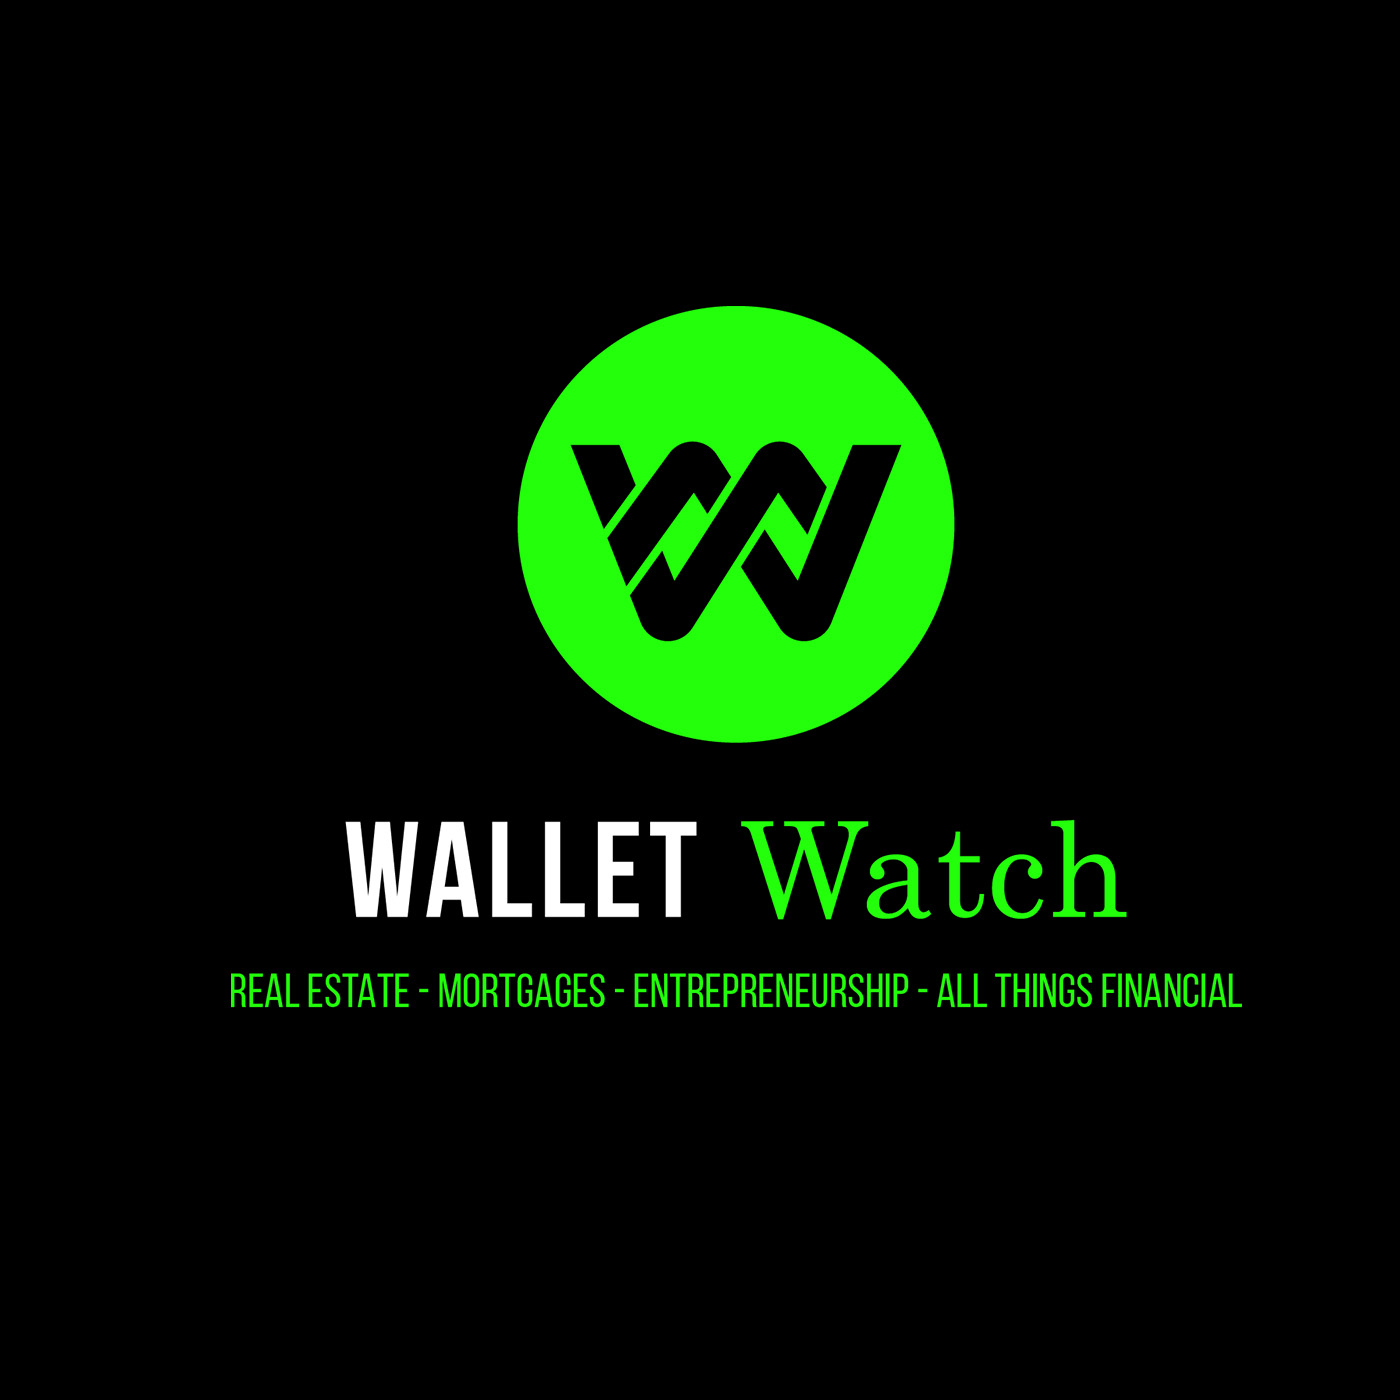 Show artwork for Wallet Watch